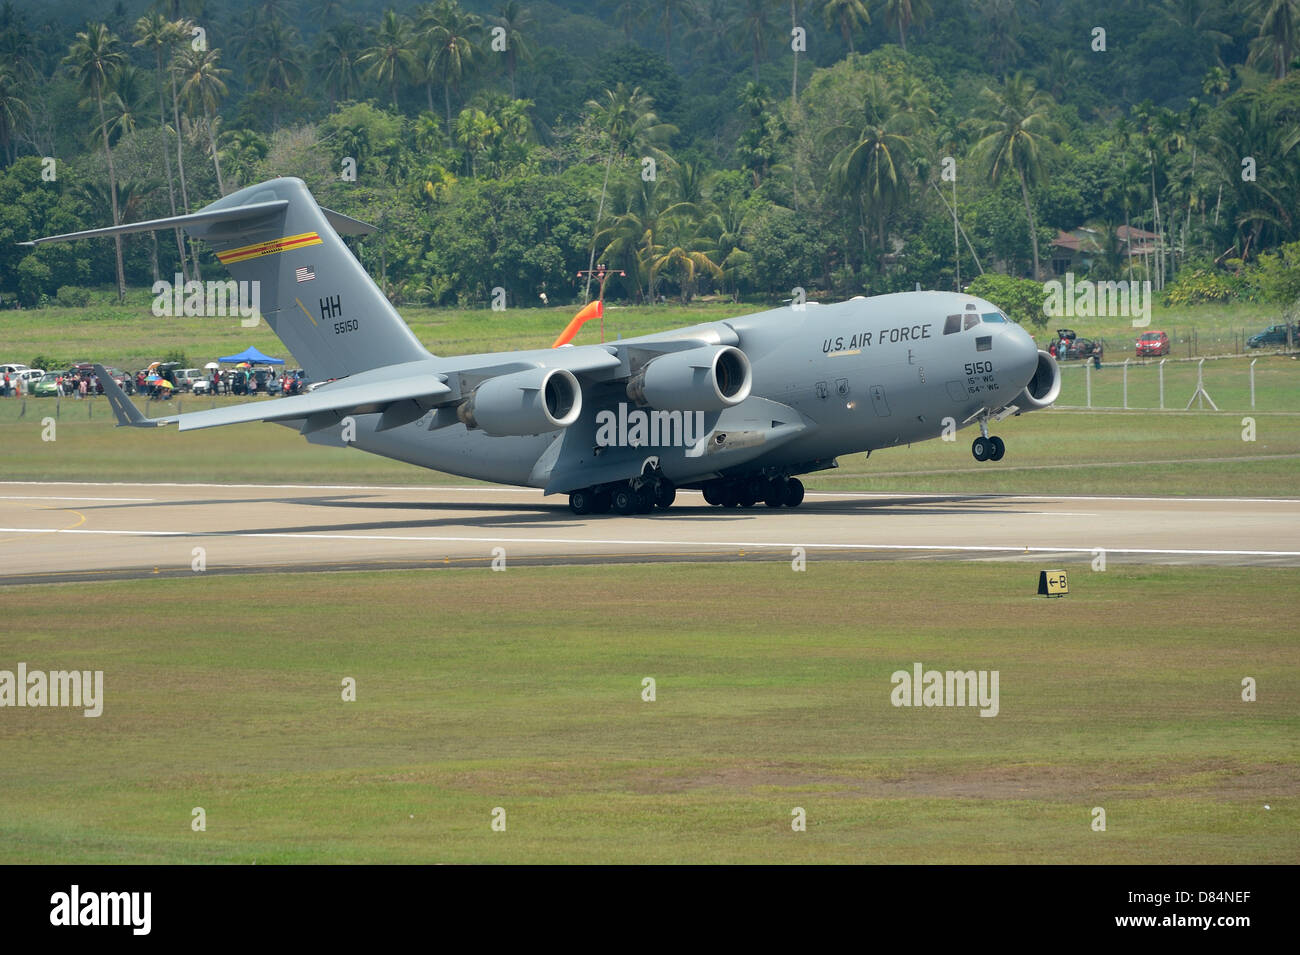 March 30, 2013 - A Boeing C-17 Globemaster III of the U.S. Air Force taking off from Langkawi Airport, Malaysia. Stock Photo